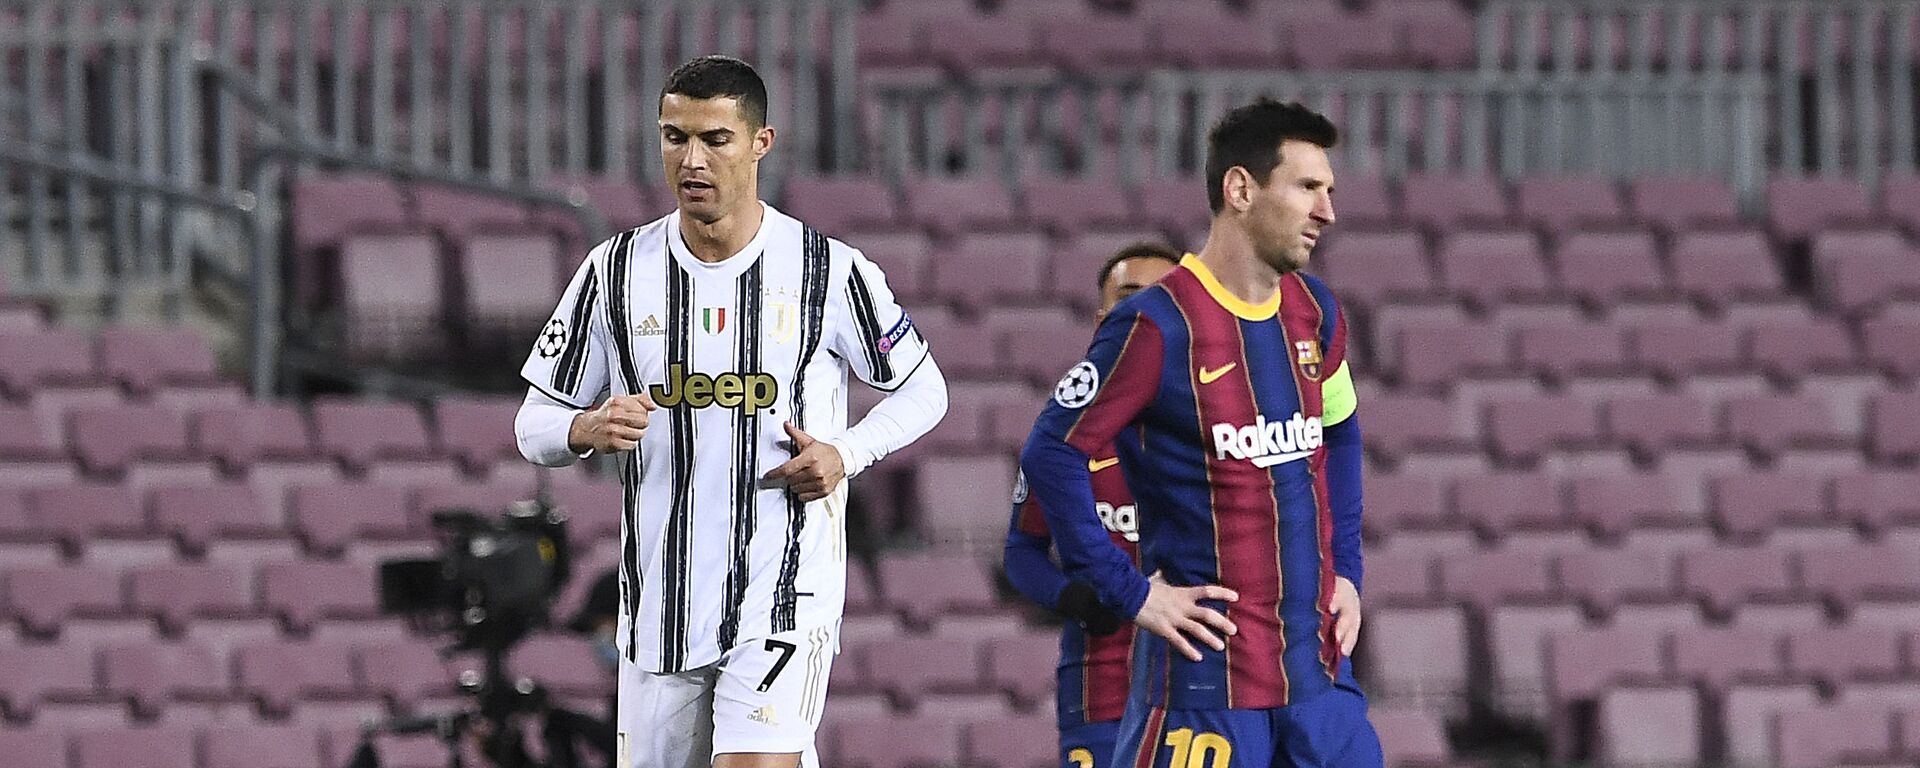 Juventus' Portuguese forward Cristiano Ronaldo (L) walks past Barcelona's Argentinian forward Lionel Messi during the UEFA Champions League group G football match between Barcelona and Juventus at the Camp Nou stadium in Barcelona on December 8, 2020 - Sputnik International, 1920, 12.08.2021